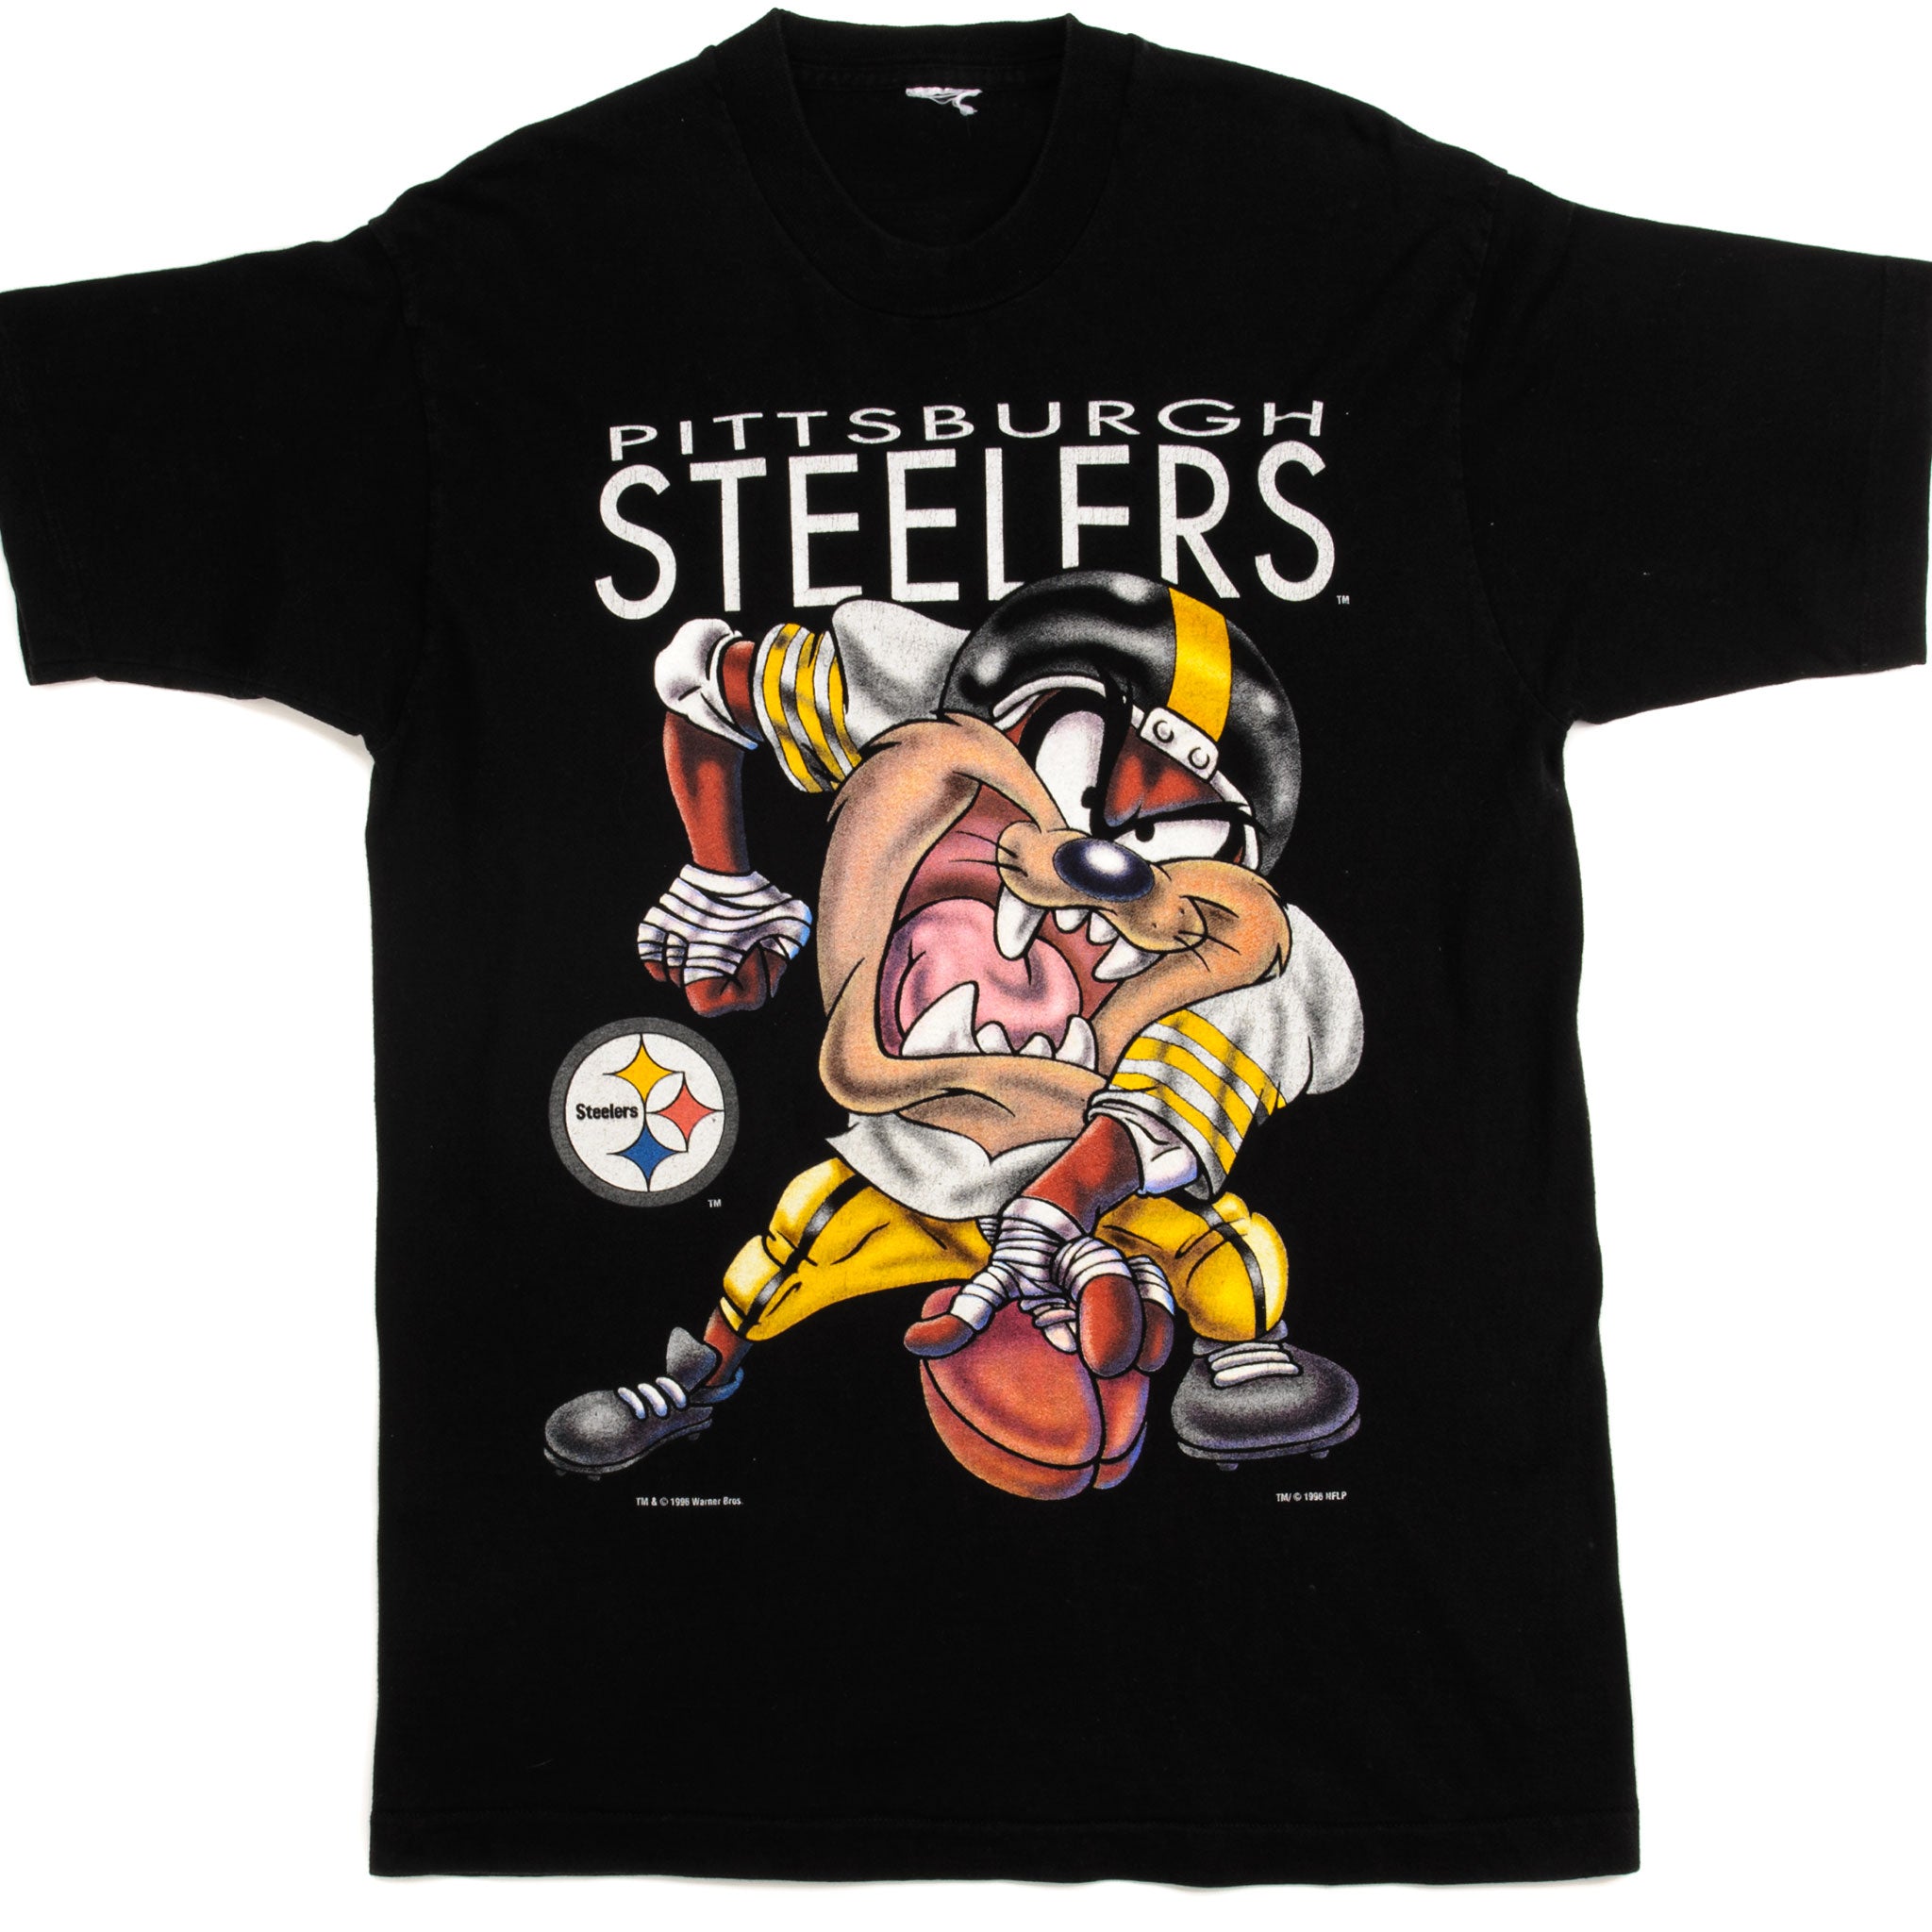 Sports / College Vintage NFL Pittsburgh Steelers Tee Shirt – V R USA